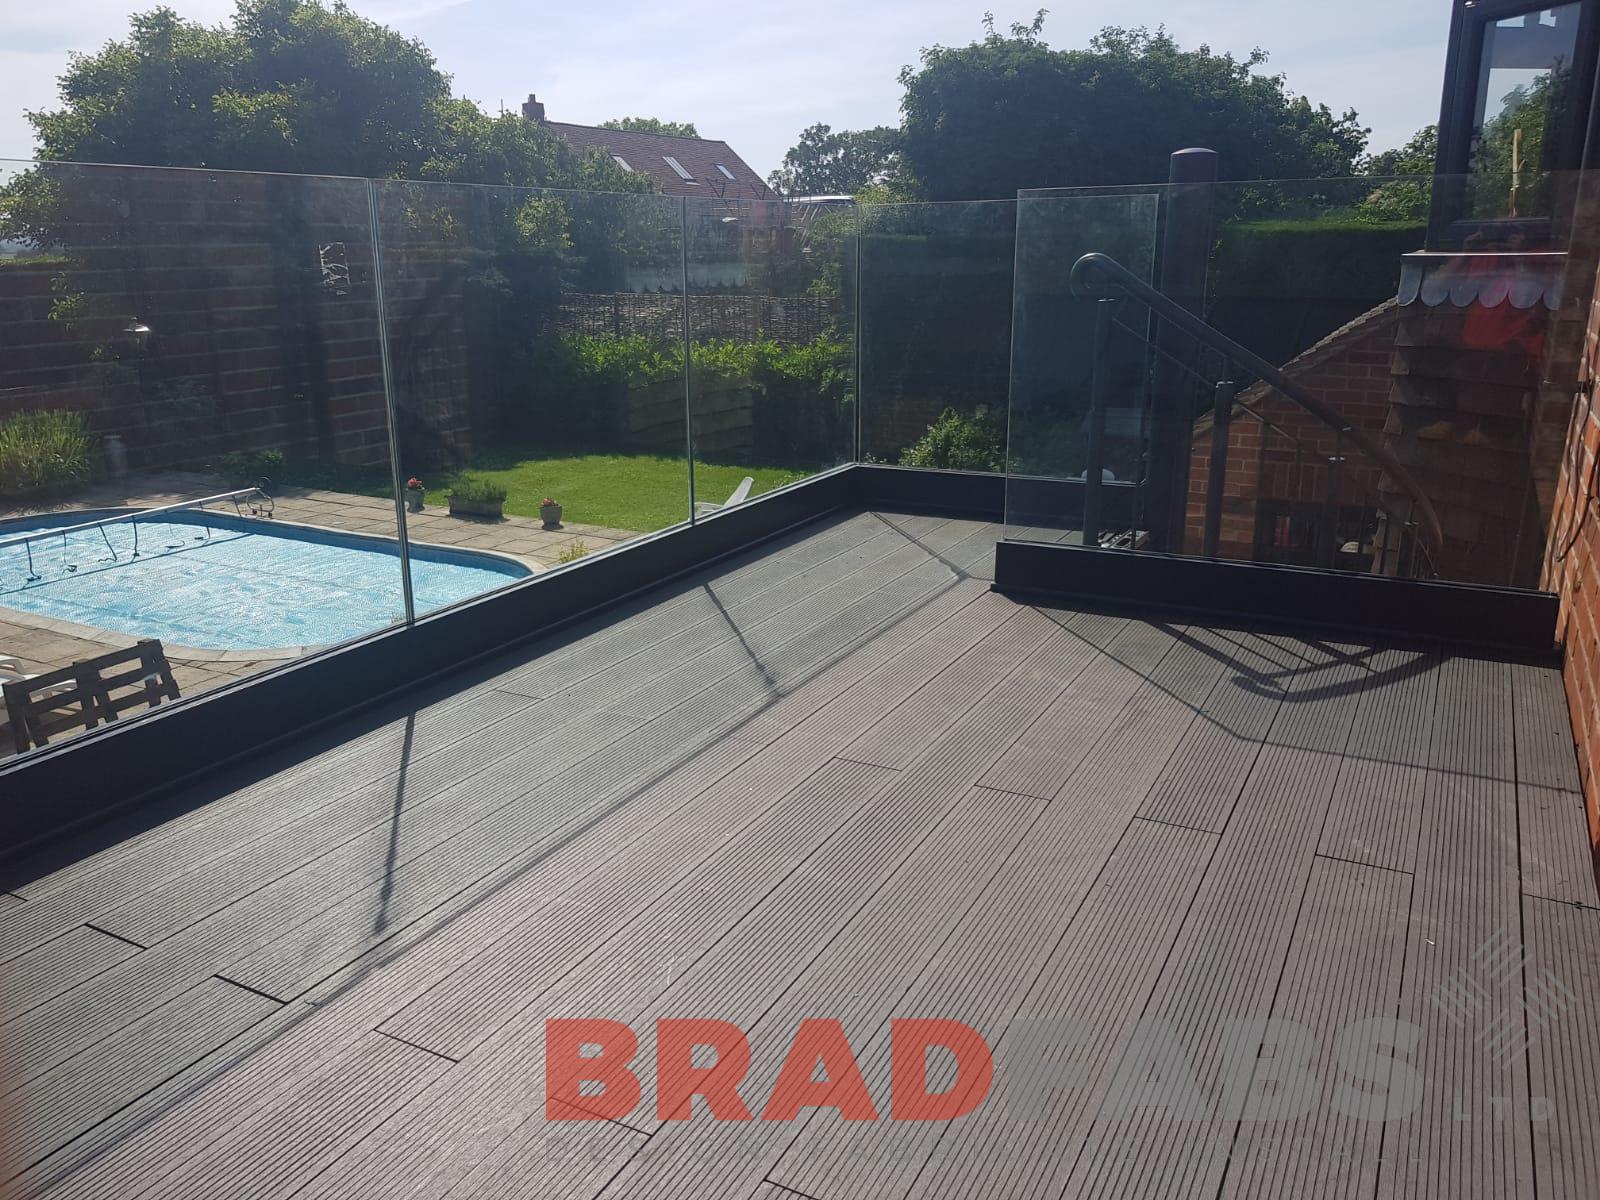 Infinity glass channel system balustrade by Bradfabs